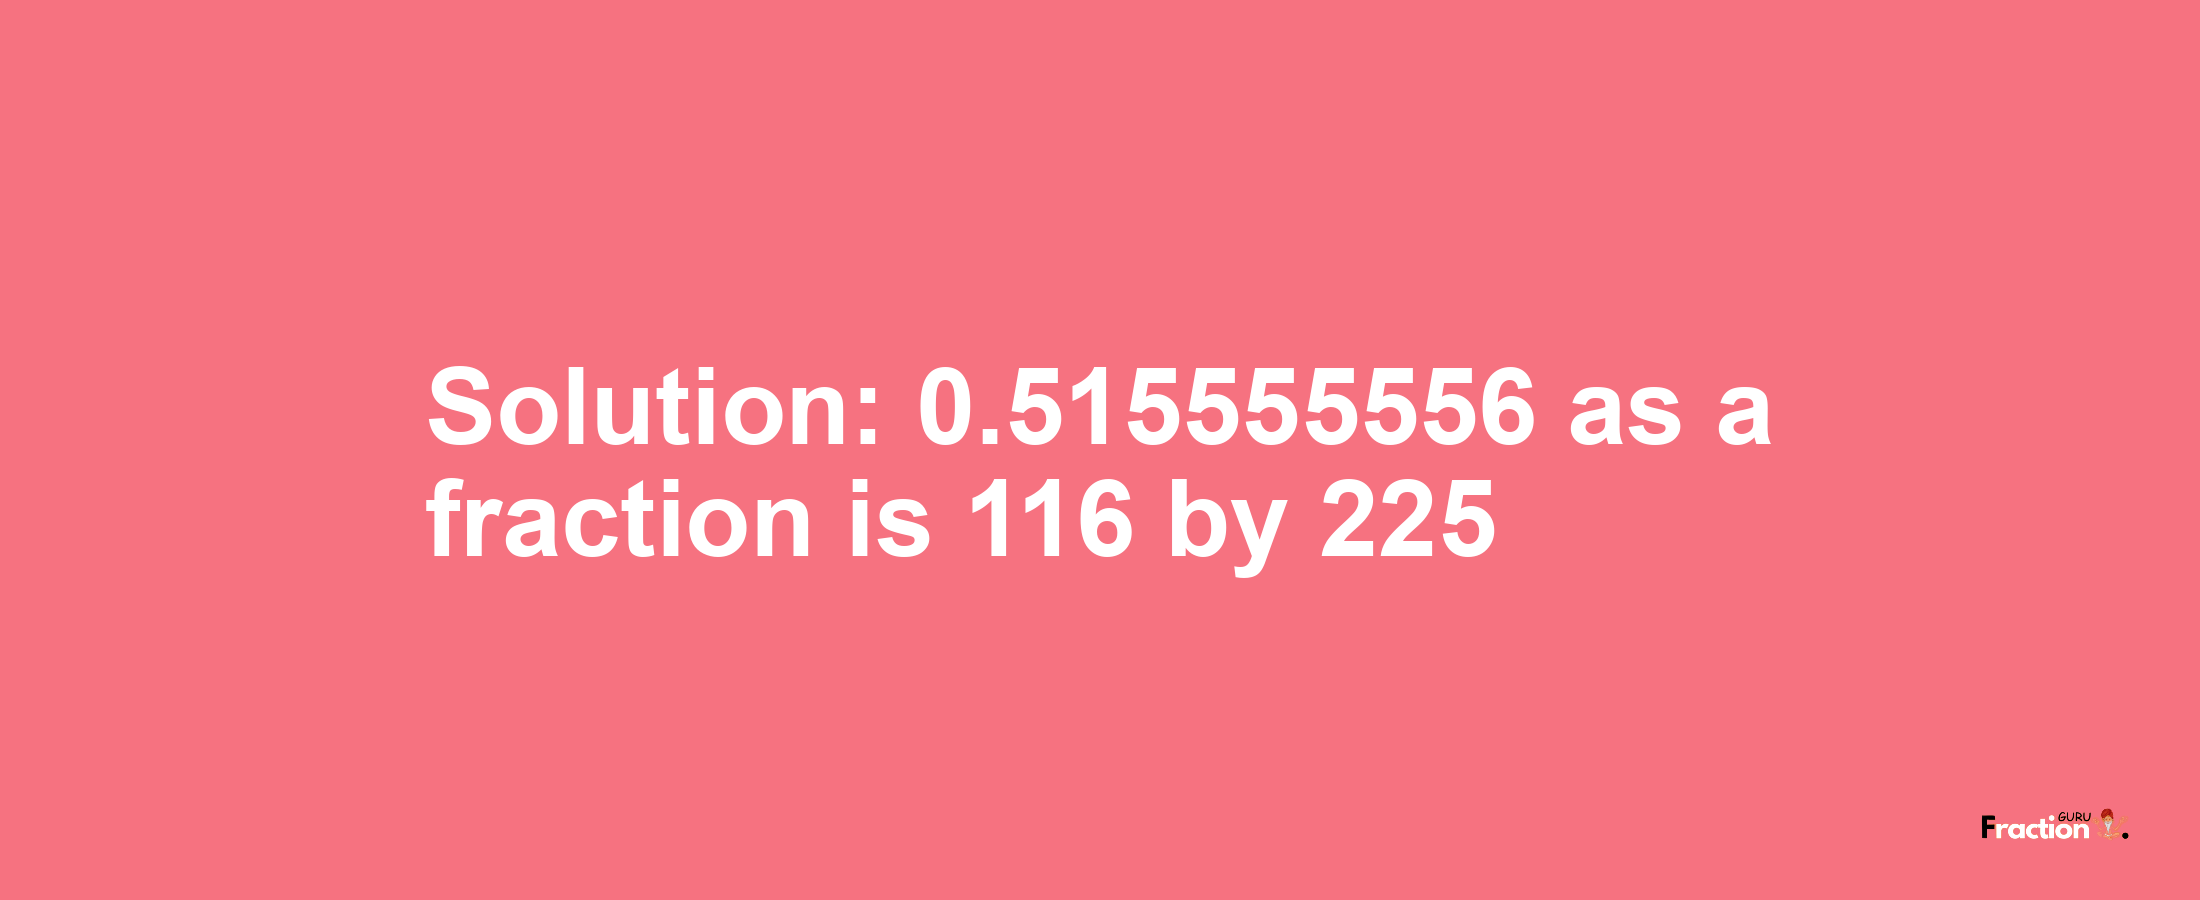 Solution:0.515555556 as a fraction is 116/225